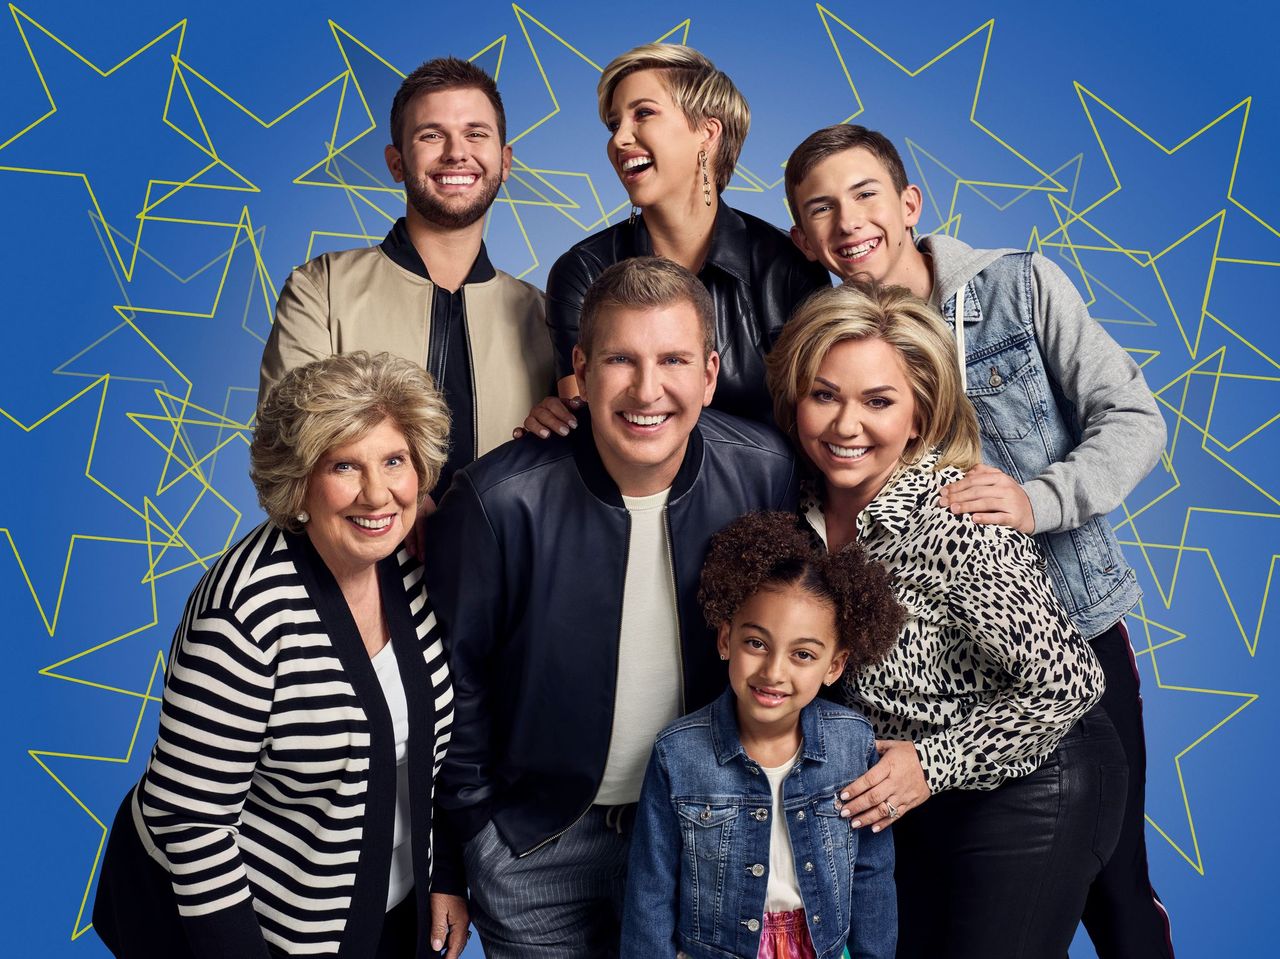 Faye Chrisley, Chase Chrisley, Todd Chrisley, Savannah Chrisley, Chloe Chrisley, Julie Chrisley, and Grayson Chrisley pose for a family portrait for "Chrisley Knows Best" Season 8. | Source: Getty Images